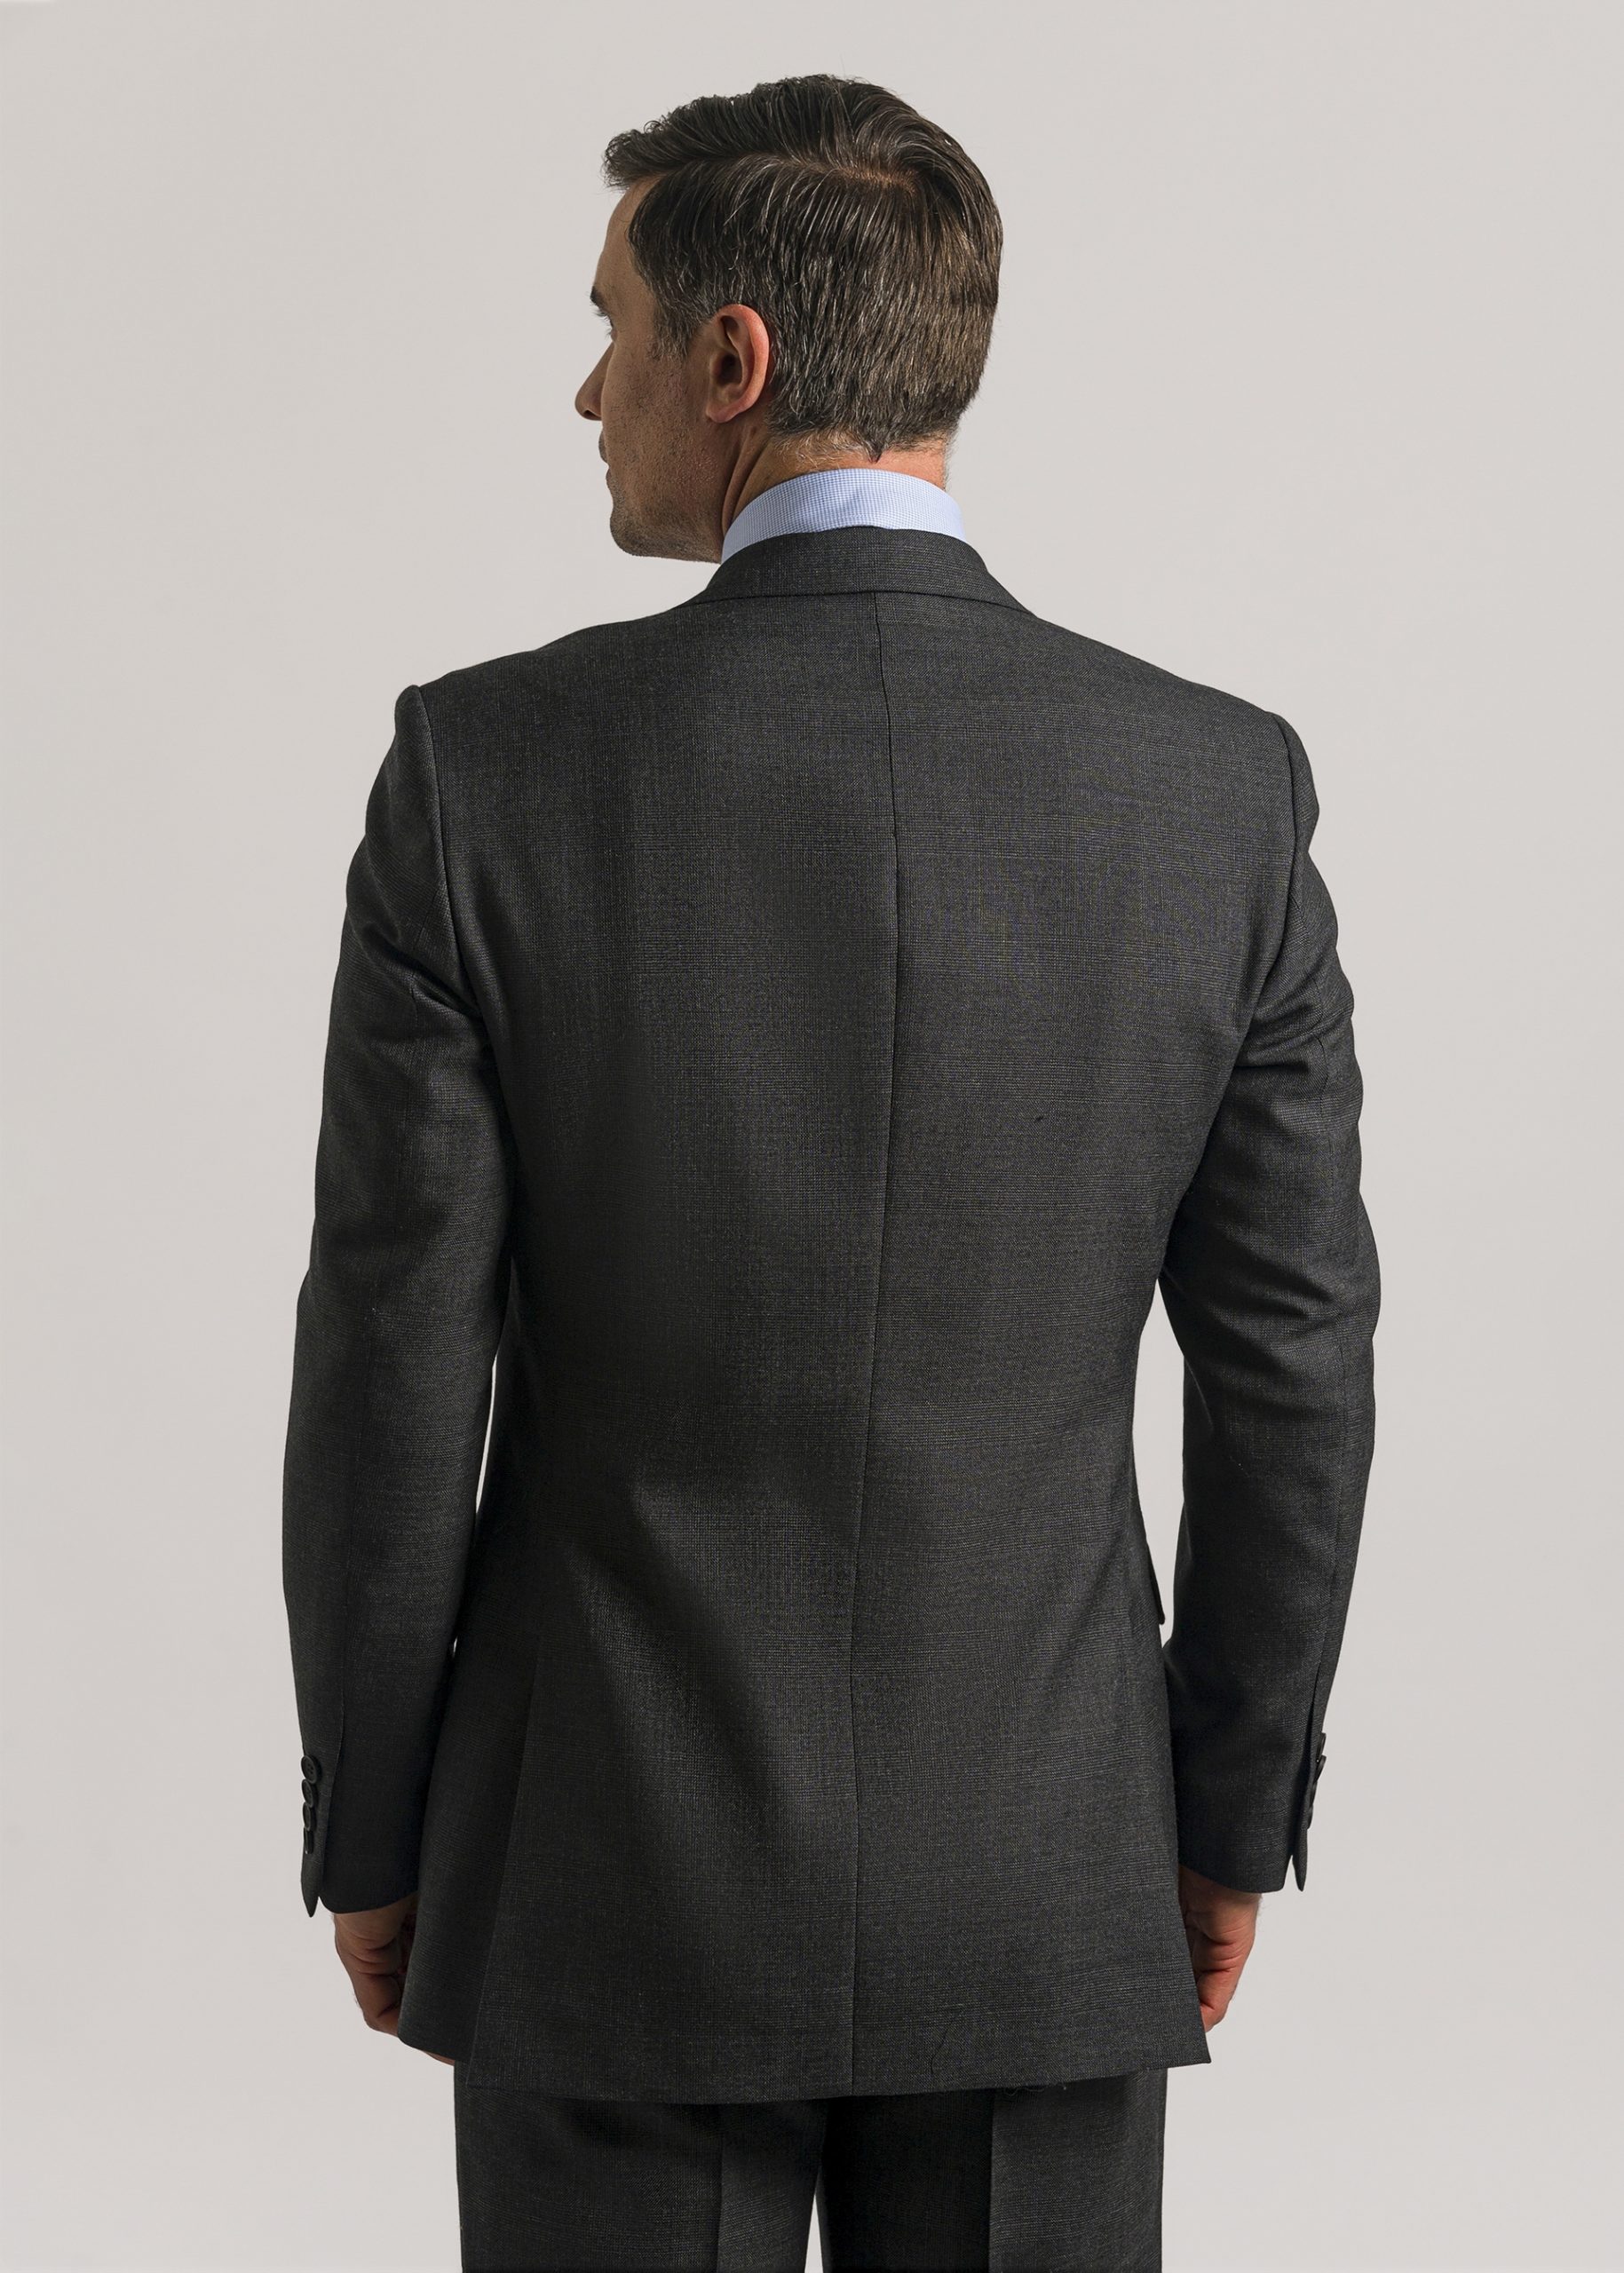 Men’s classic fit grey glen suit by Roderick Charles